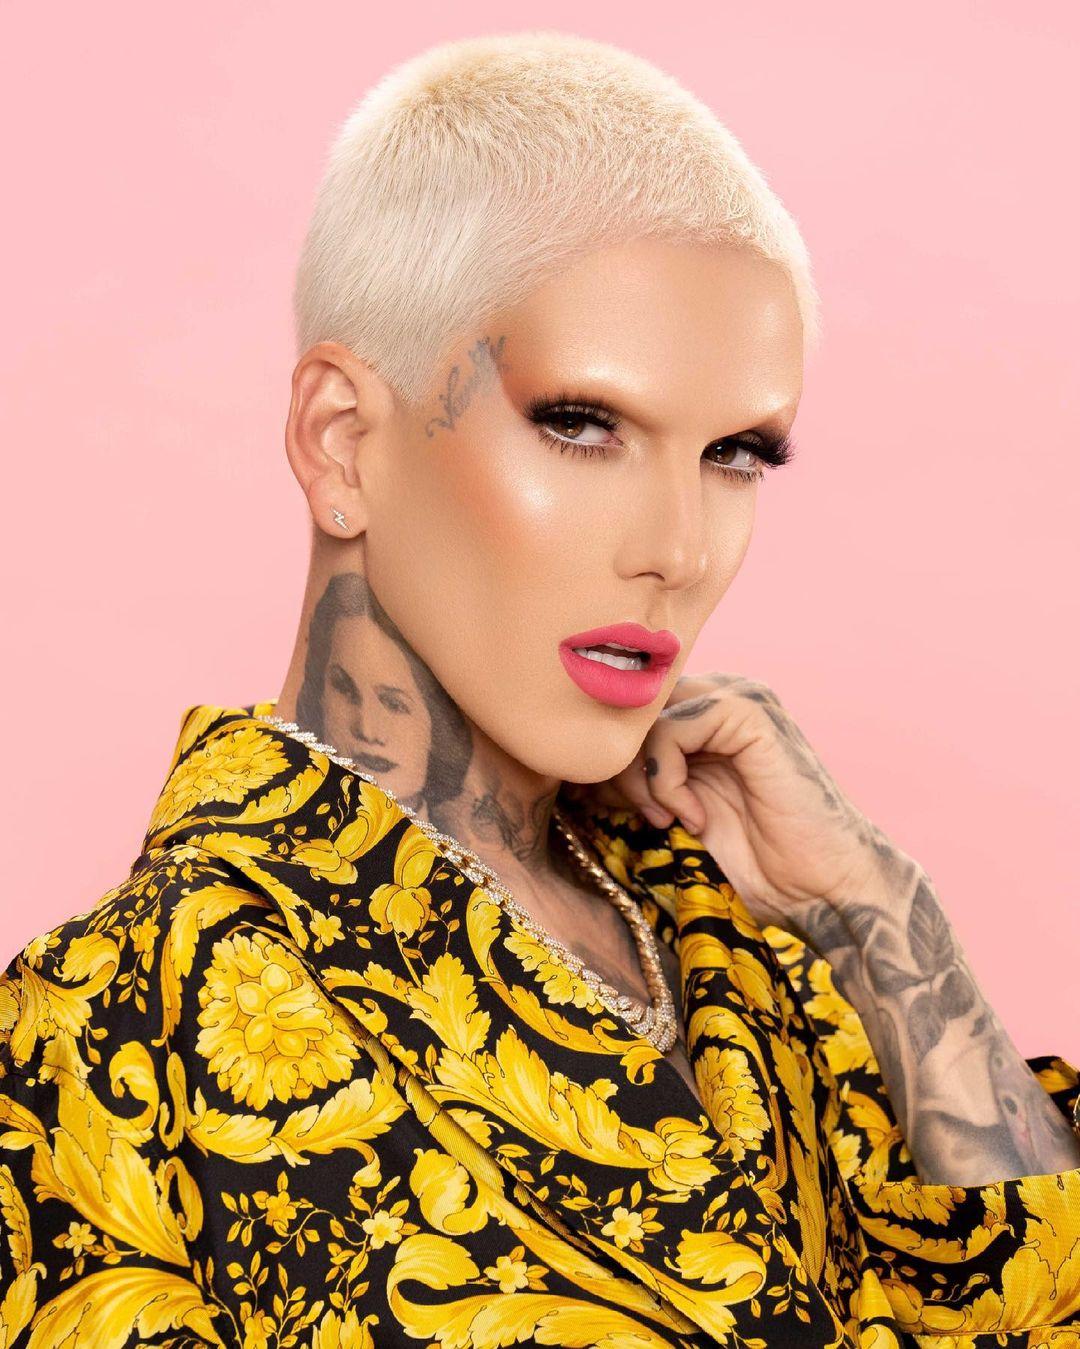 Jeffree Star in front of a pink backdrop